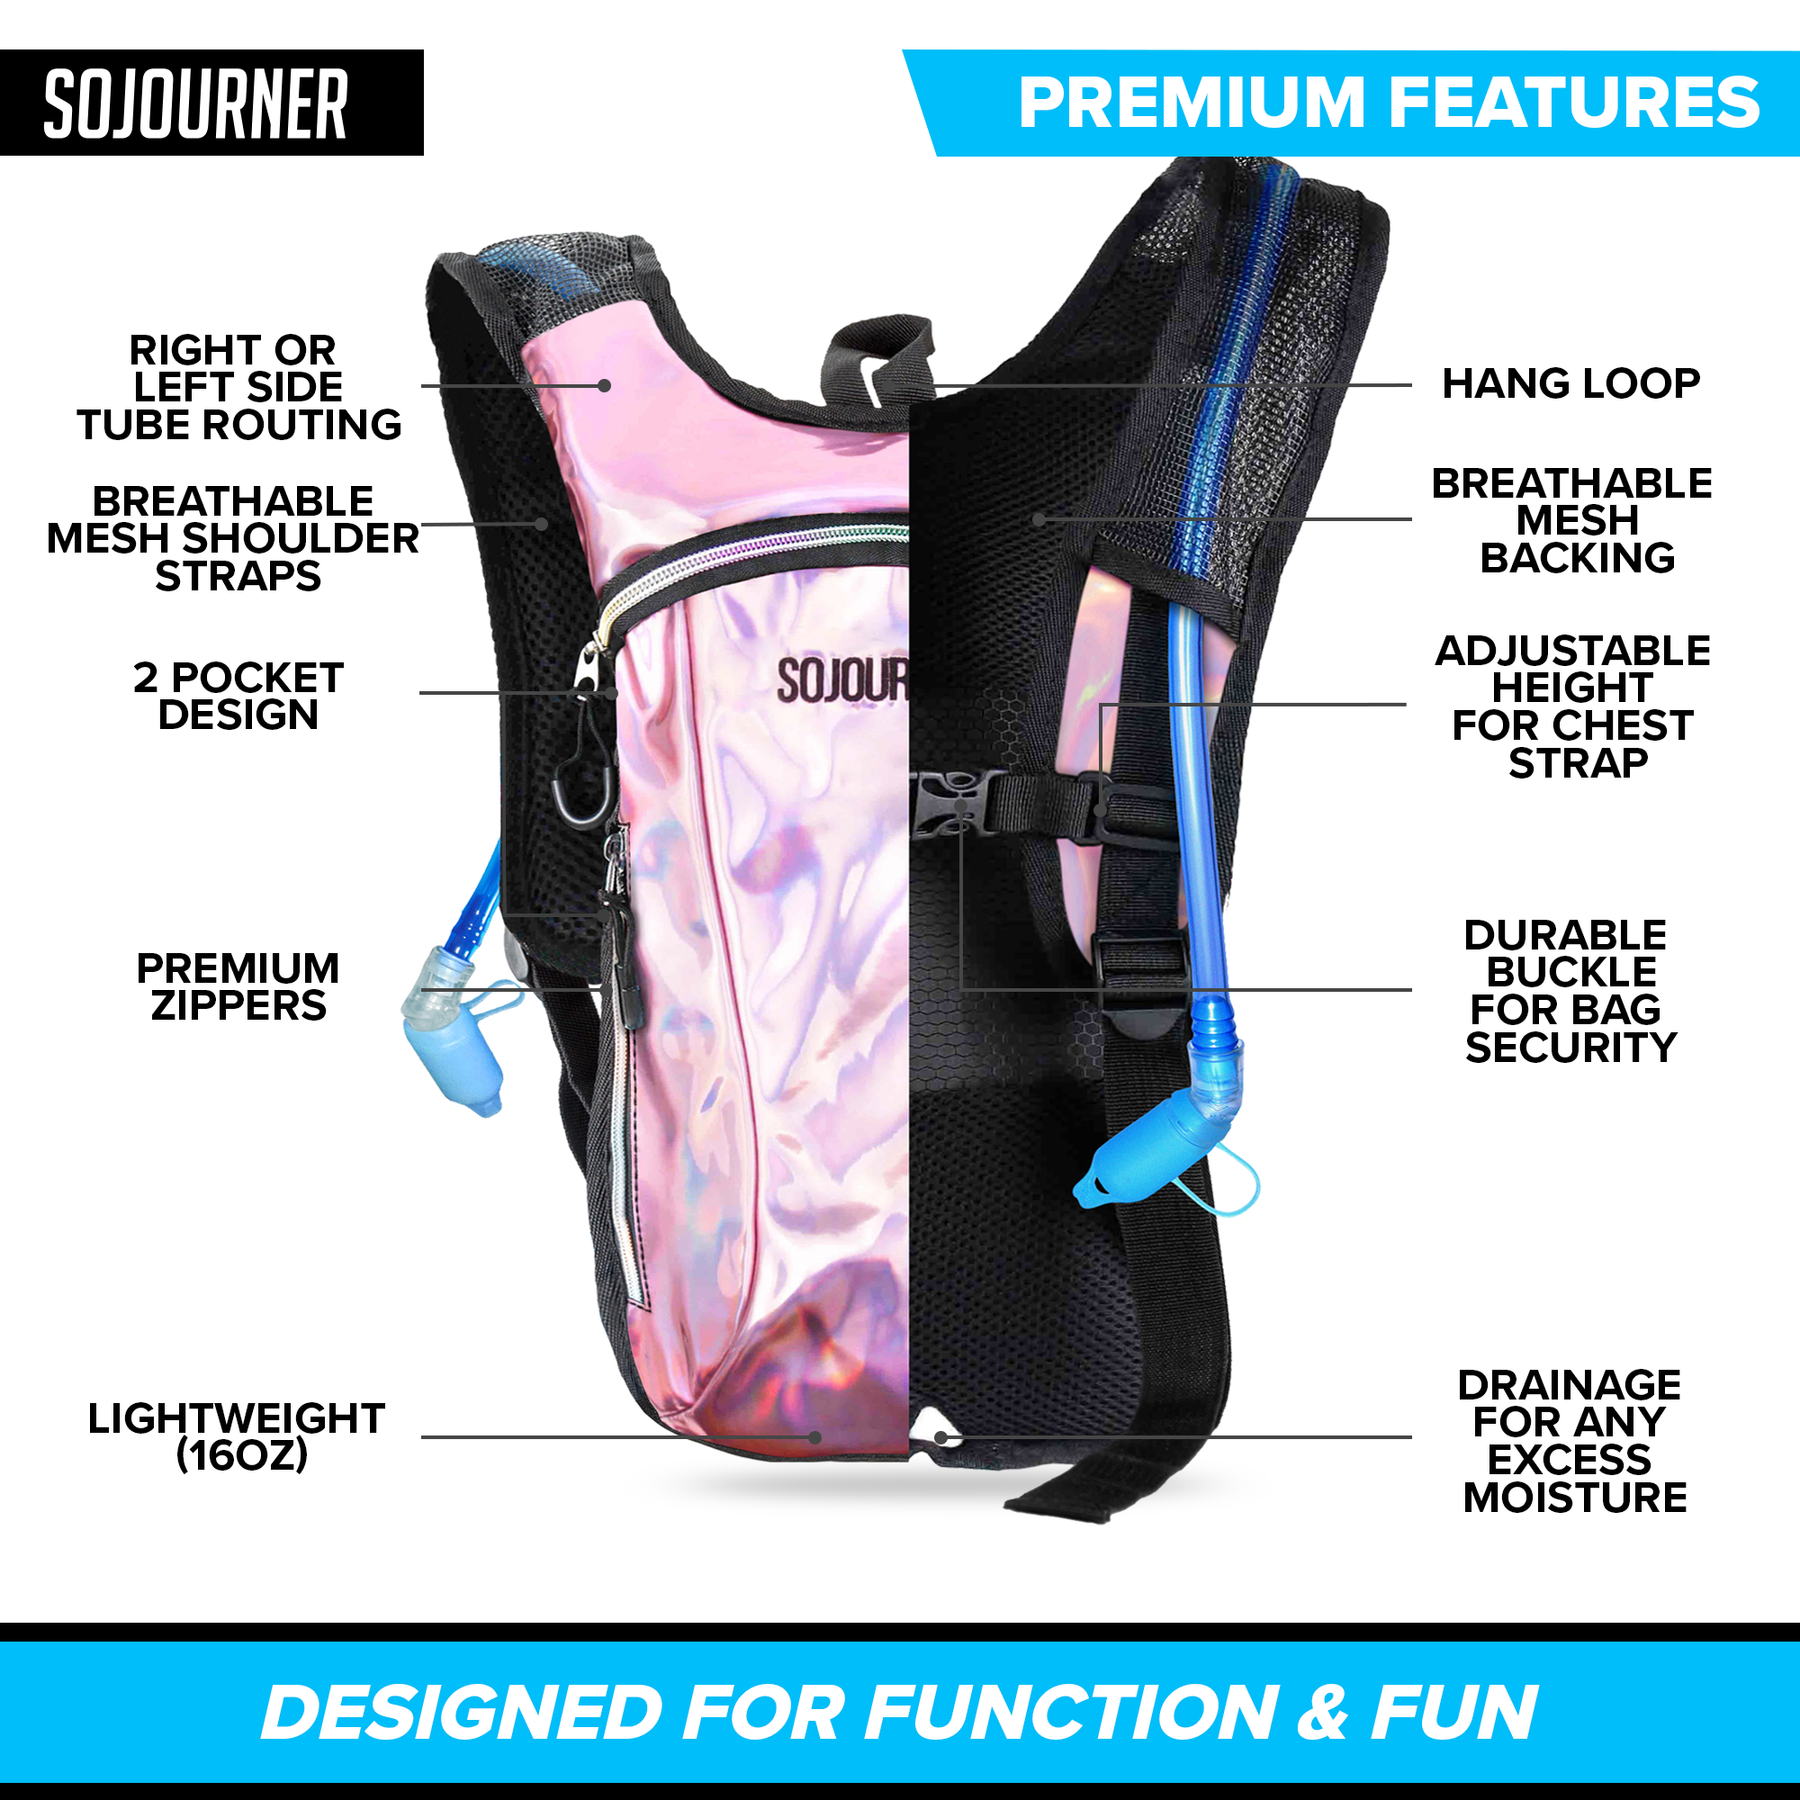 Hydration Pack Backpack - 2L Water Bladder - Holographic Pink